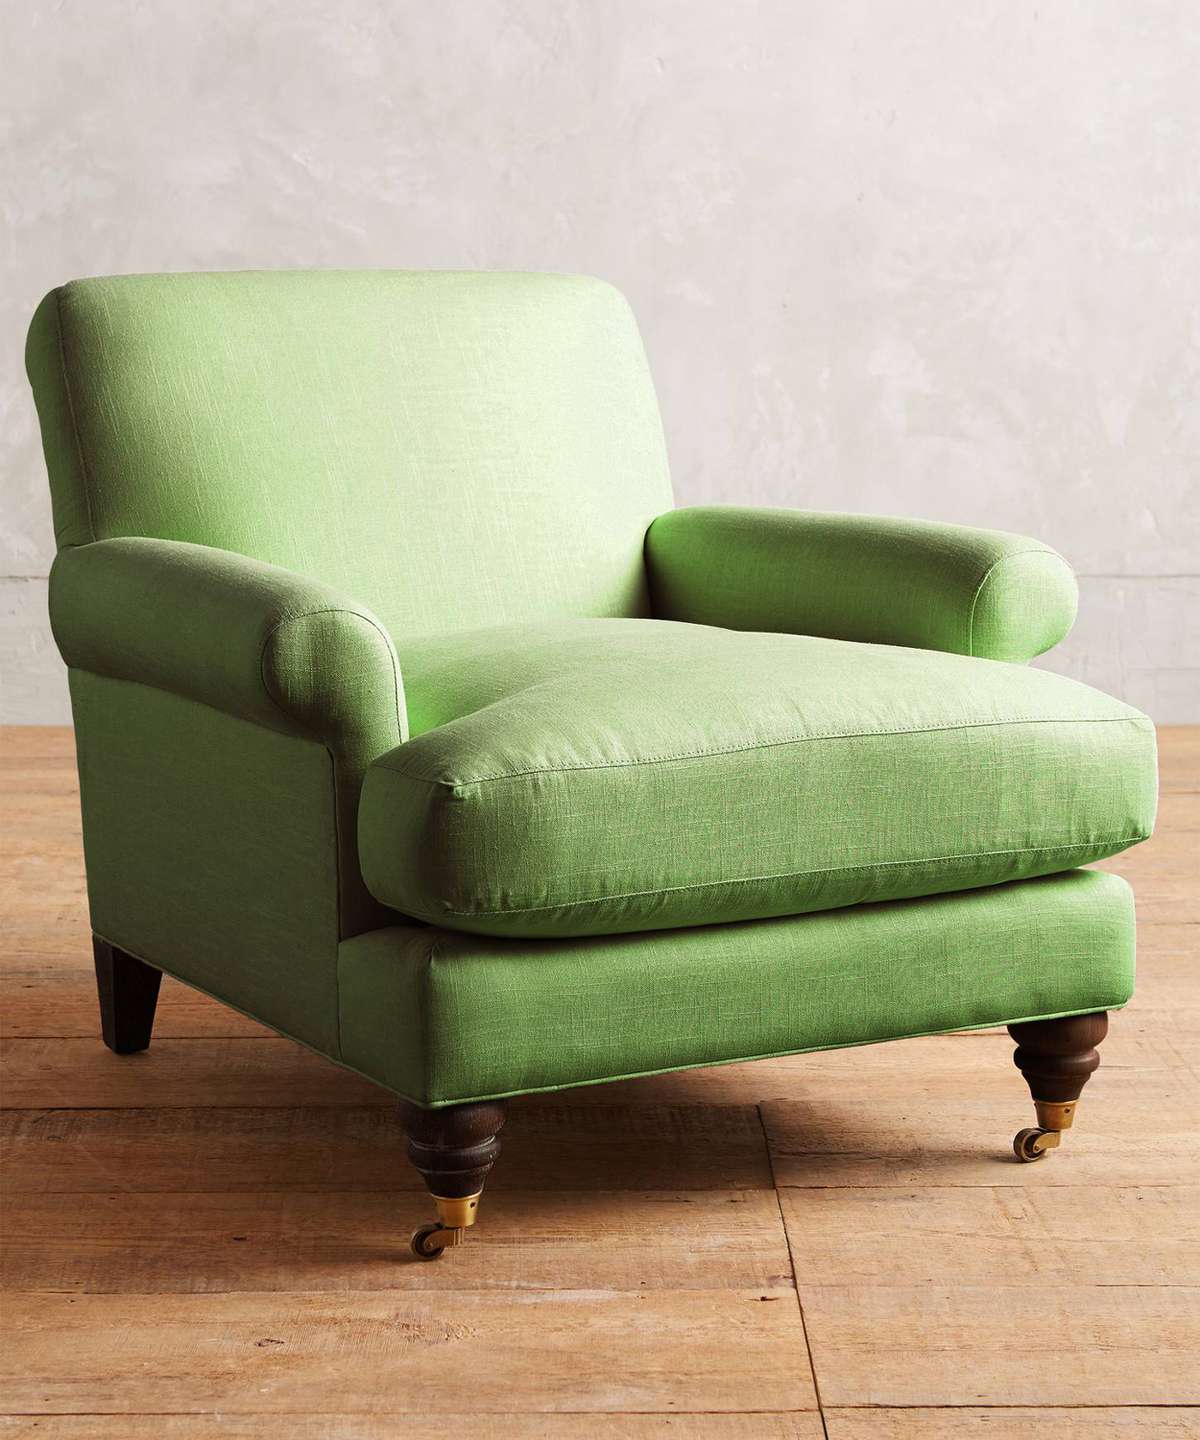 ANTHROPOLOGIE Linen Willoughby Chair